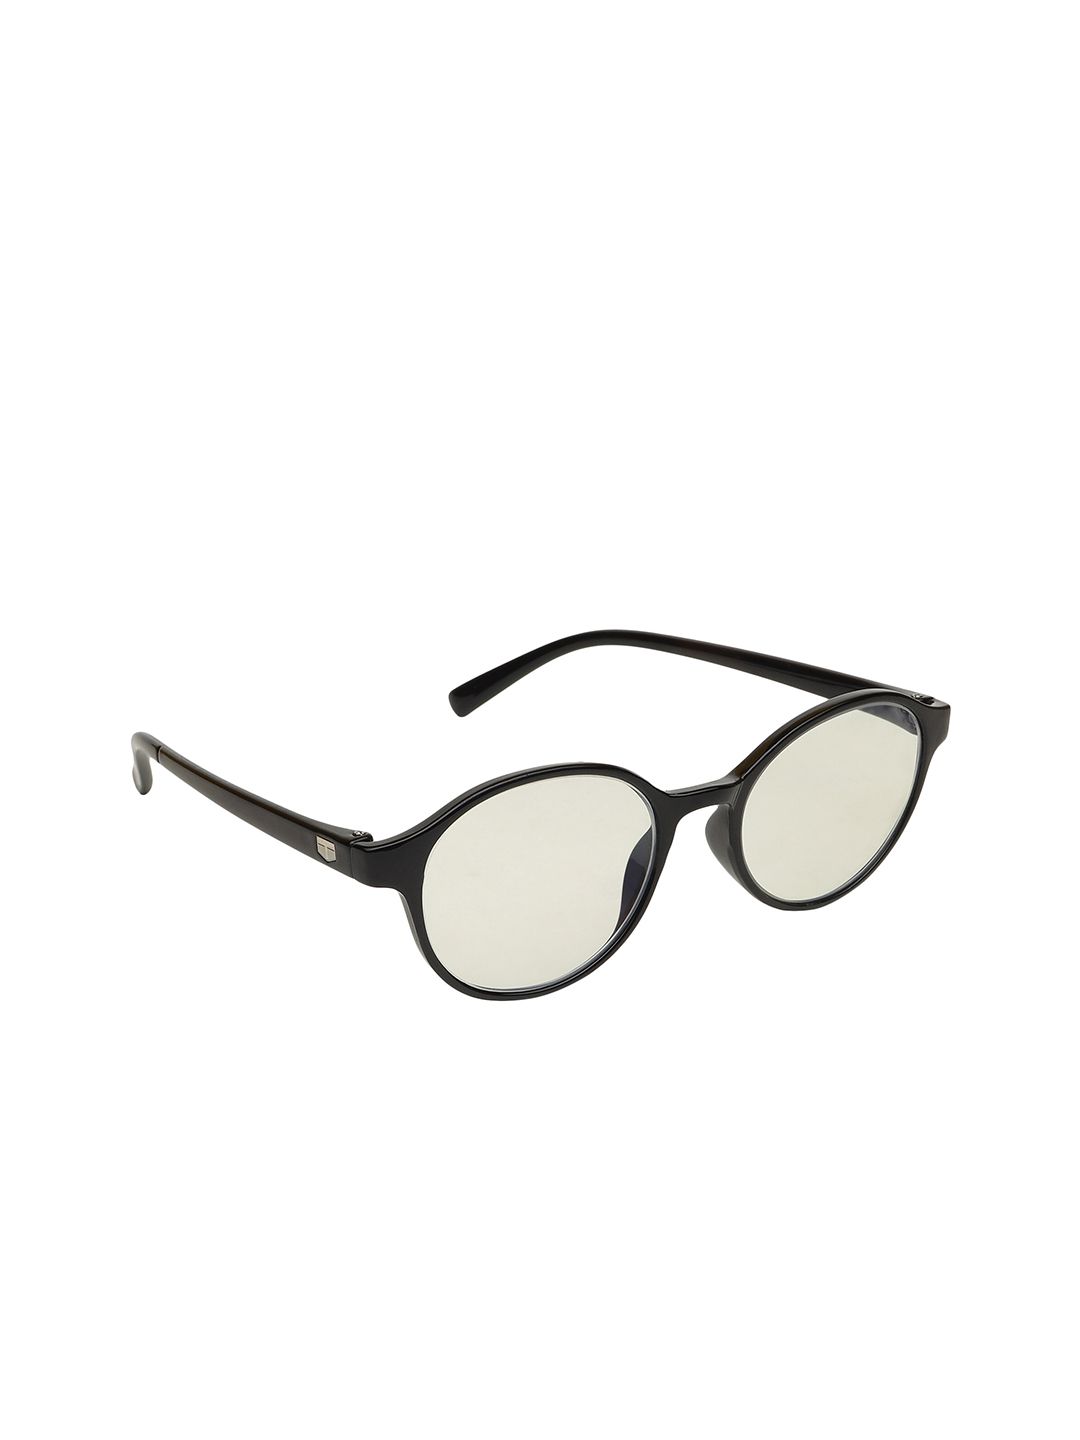 SCAGLIA Unisex Clear Lens & Black Round Sunglasses with UV Protected Lens ROUND_BC Price in India